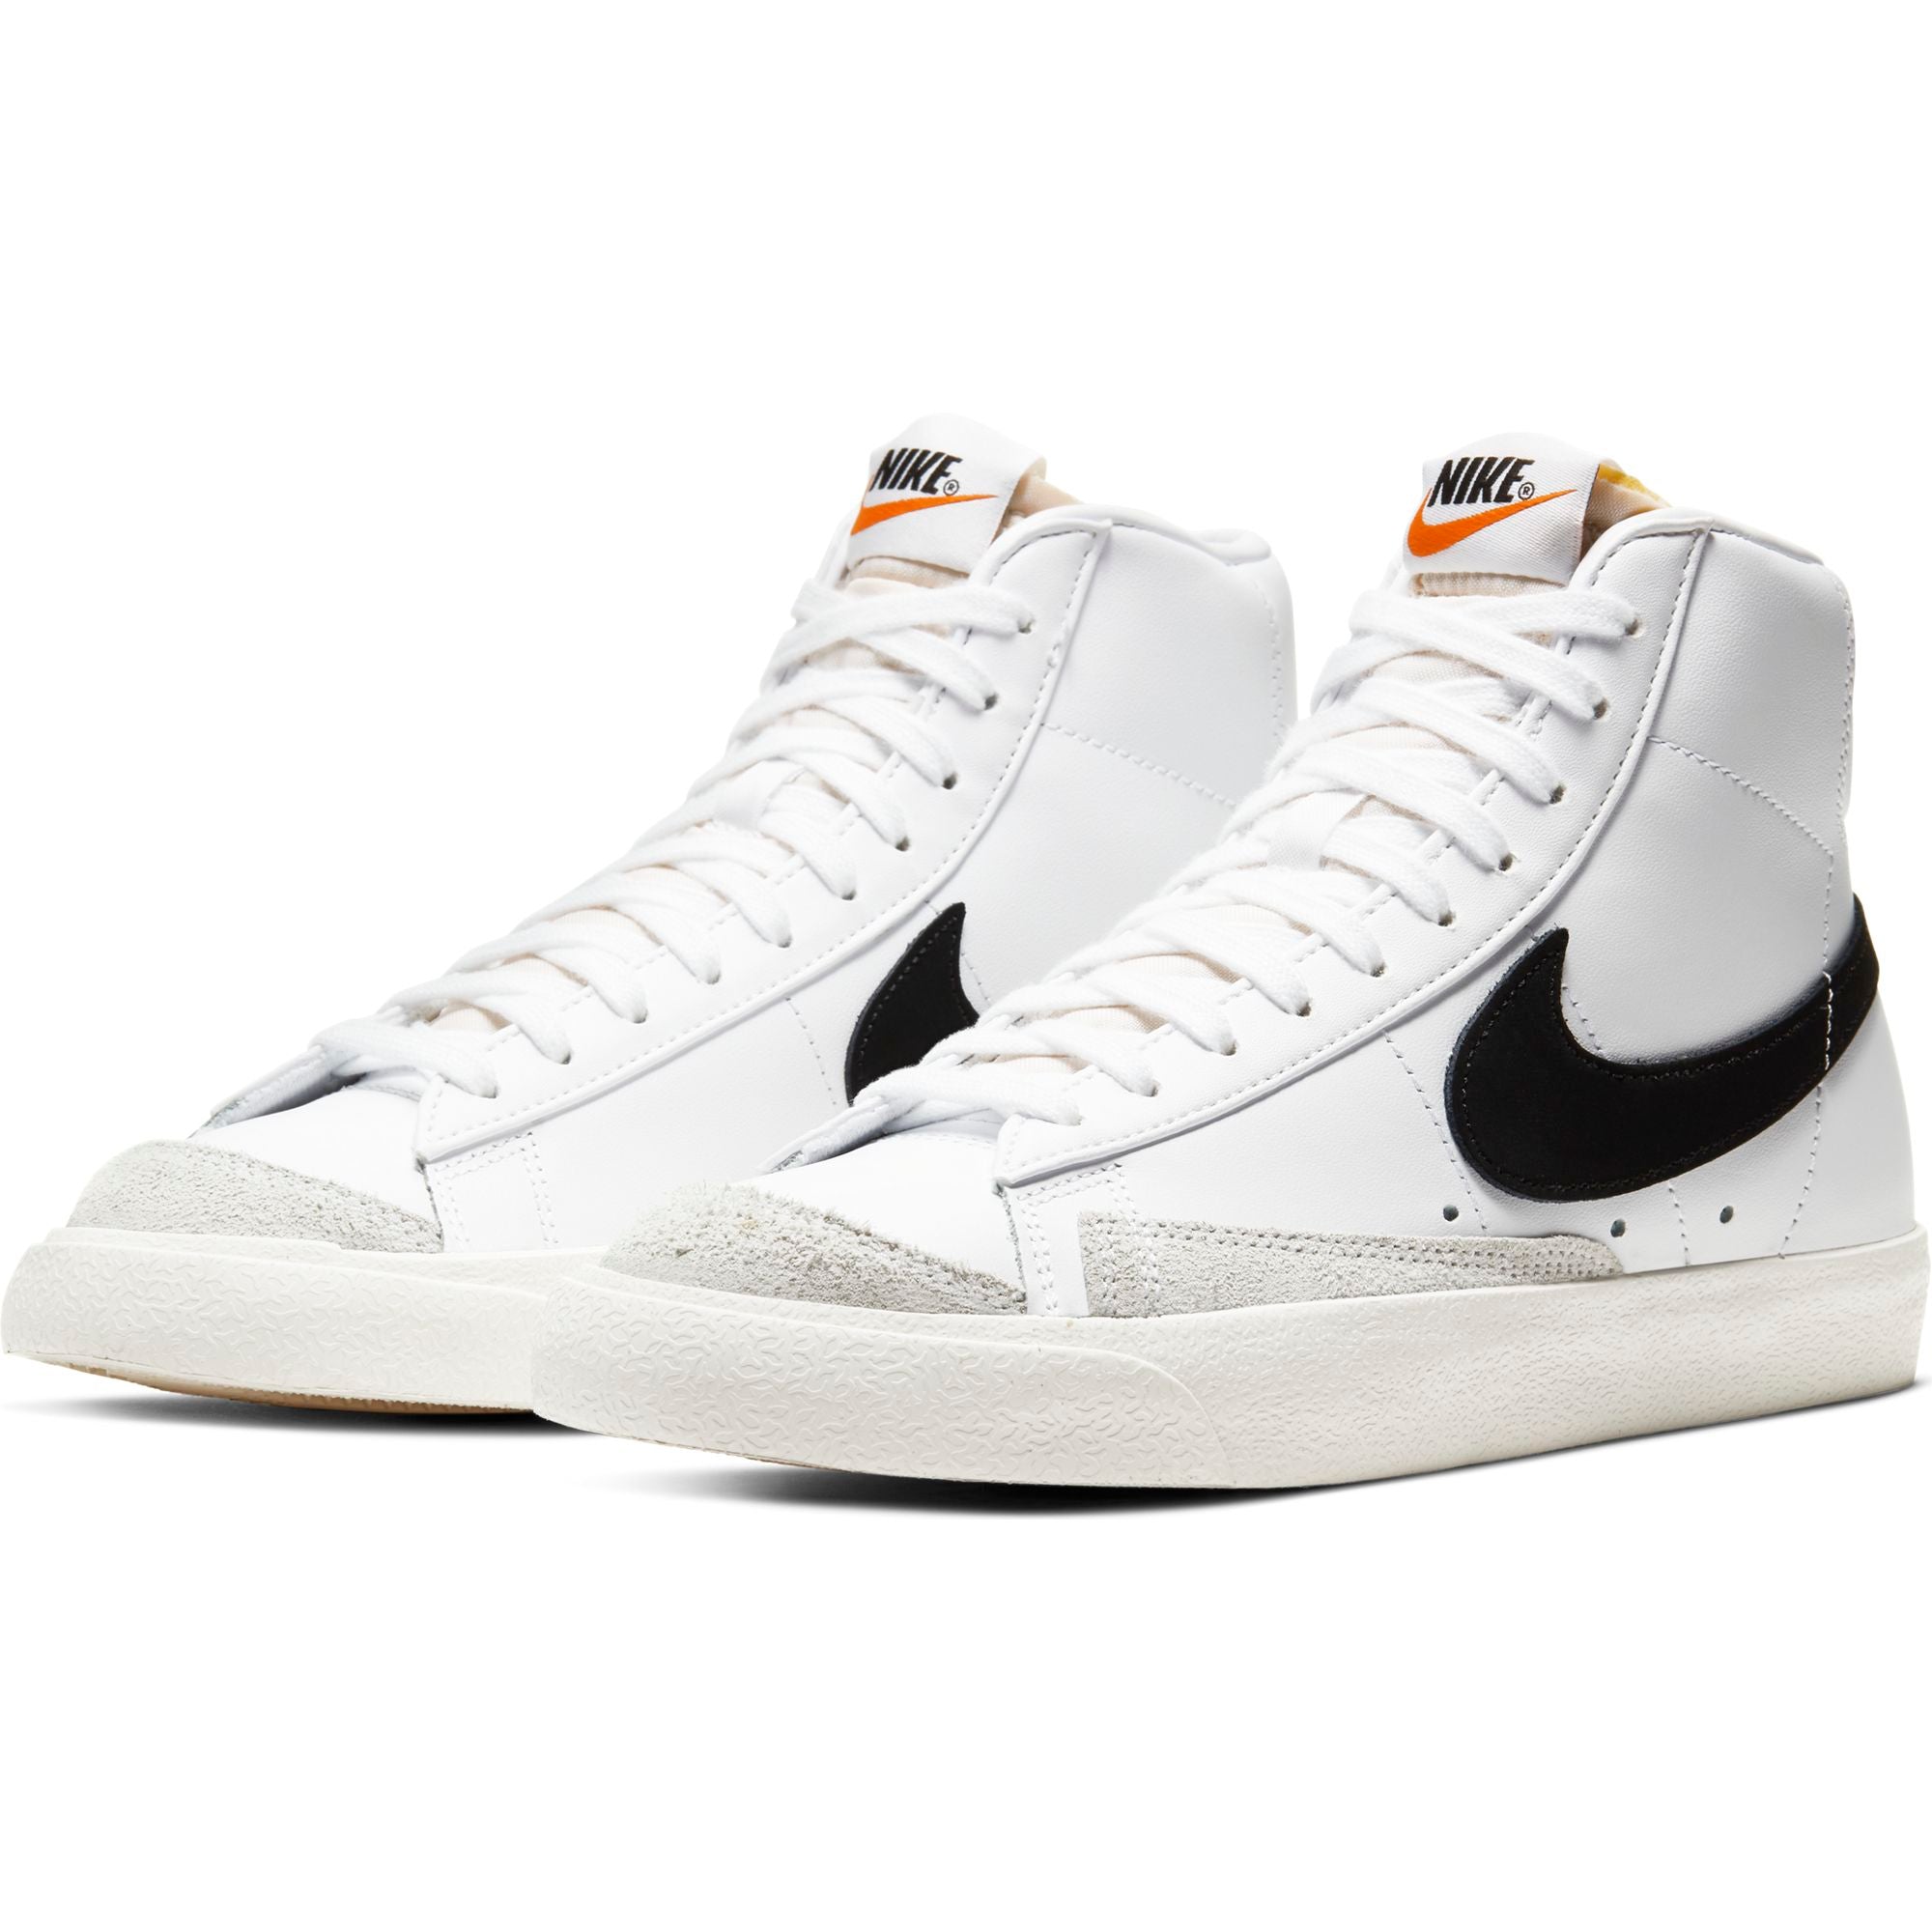 Nike Blazer: A Complete Guide - Fastsole